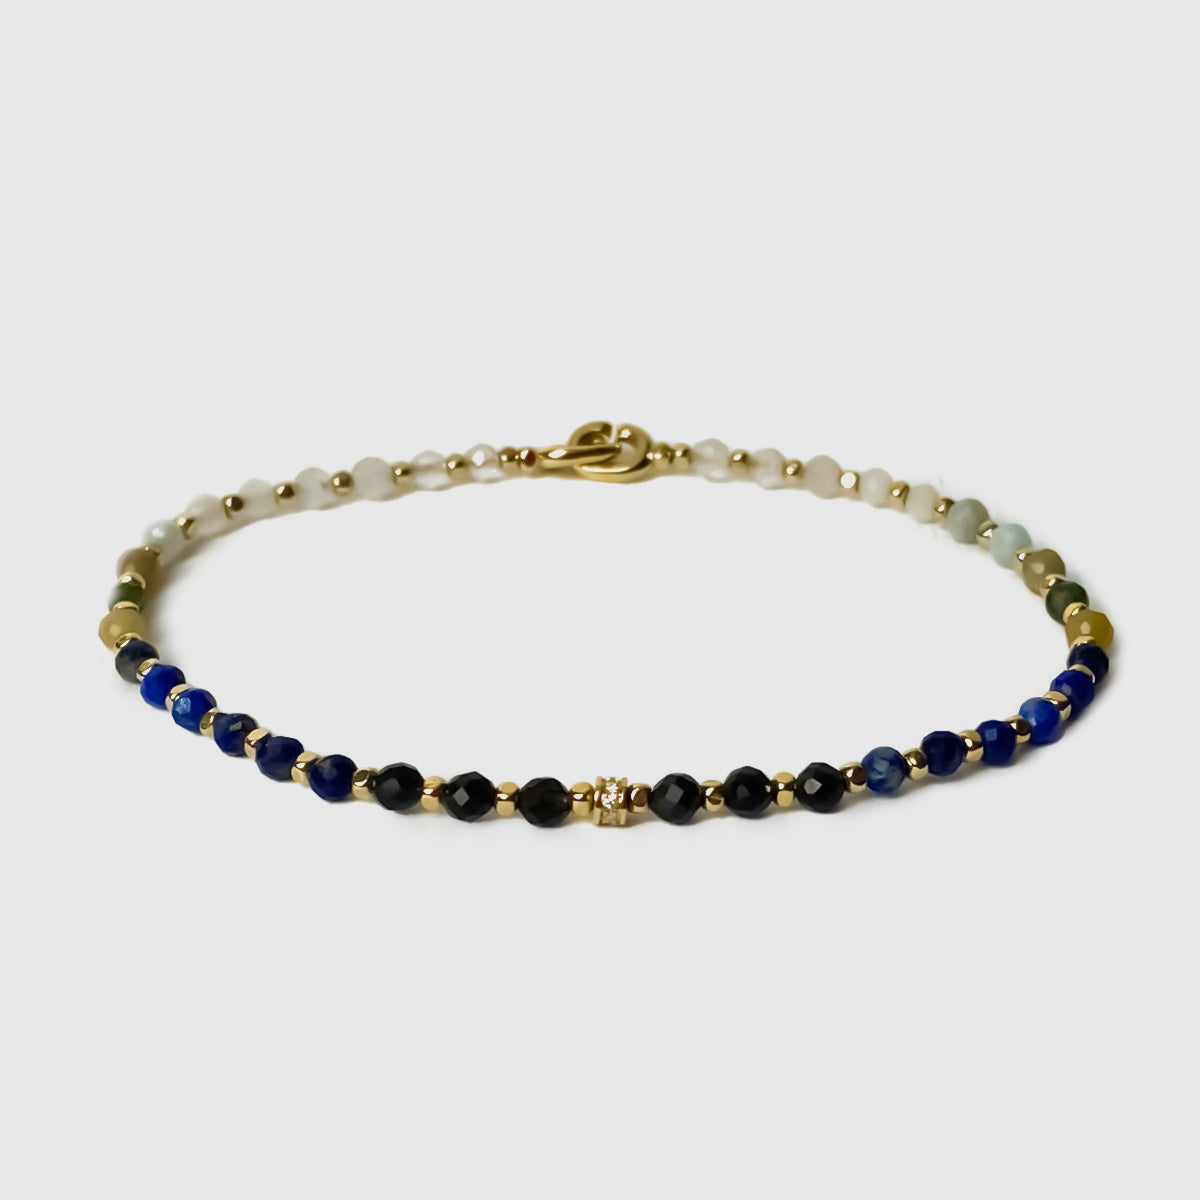 Crystal Bracelet in Yellow Gold / Blue Pattern with White Diamonds